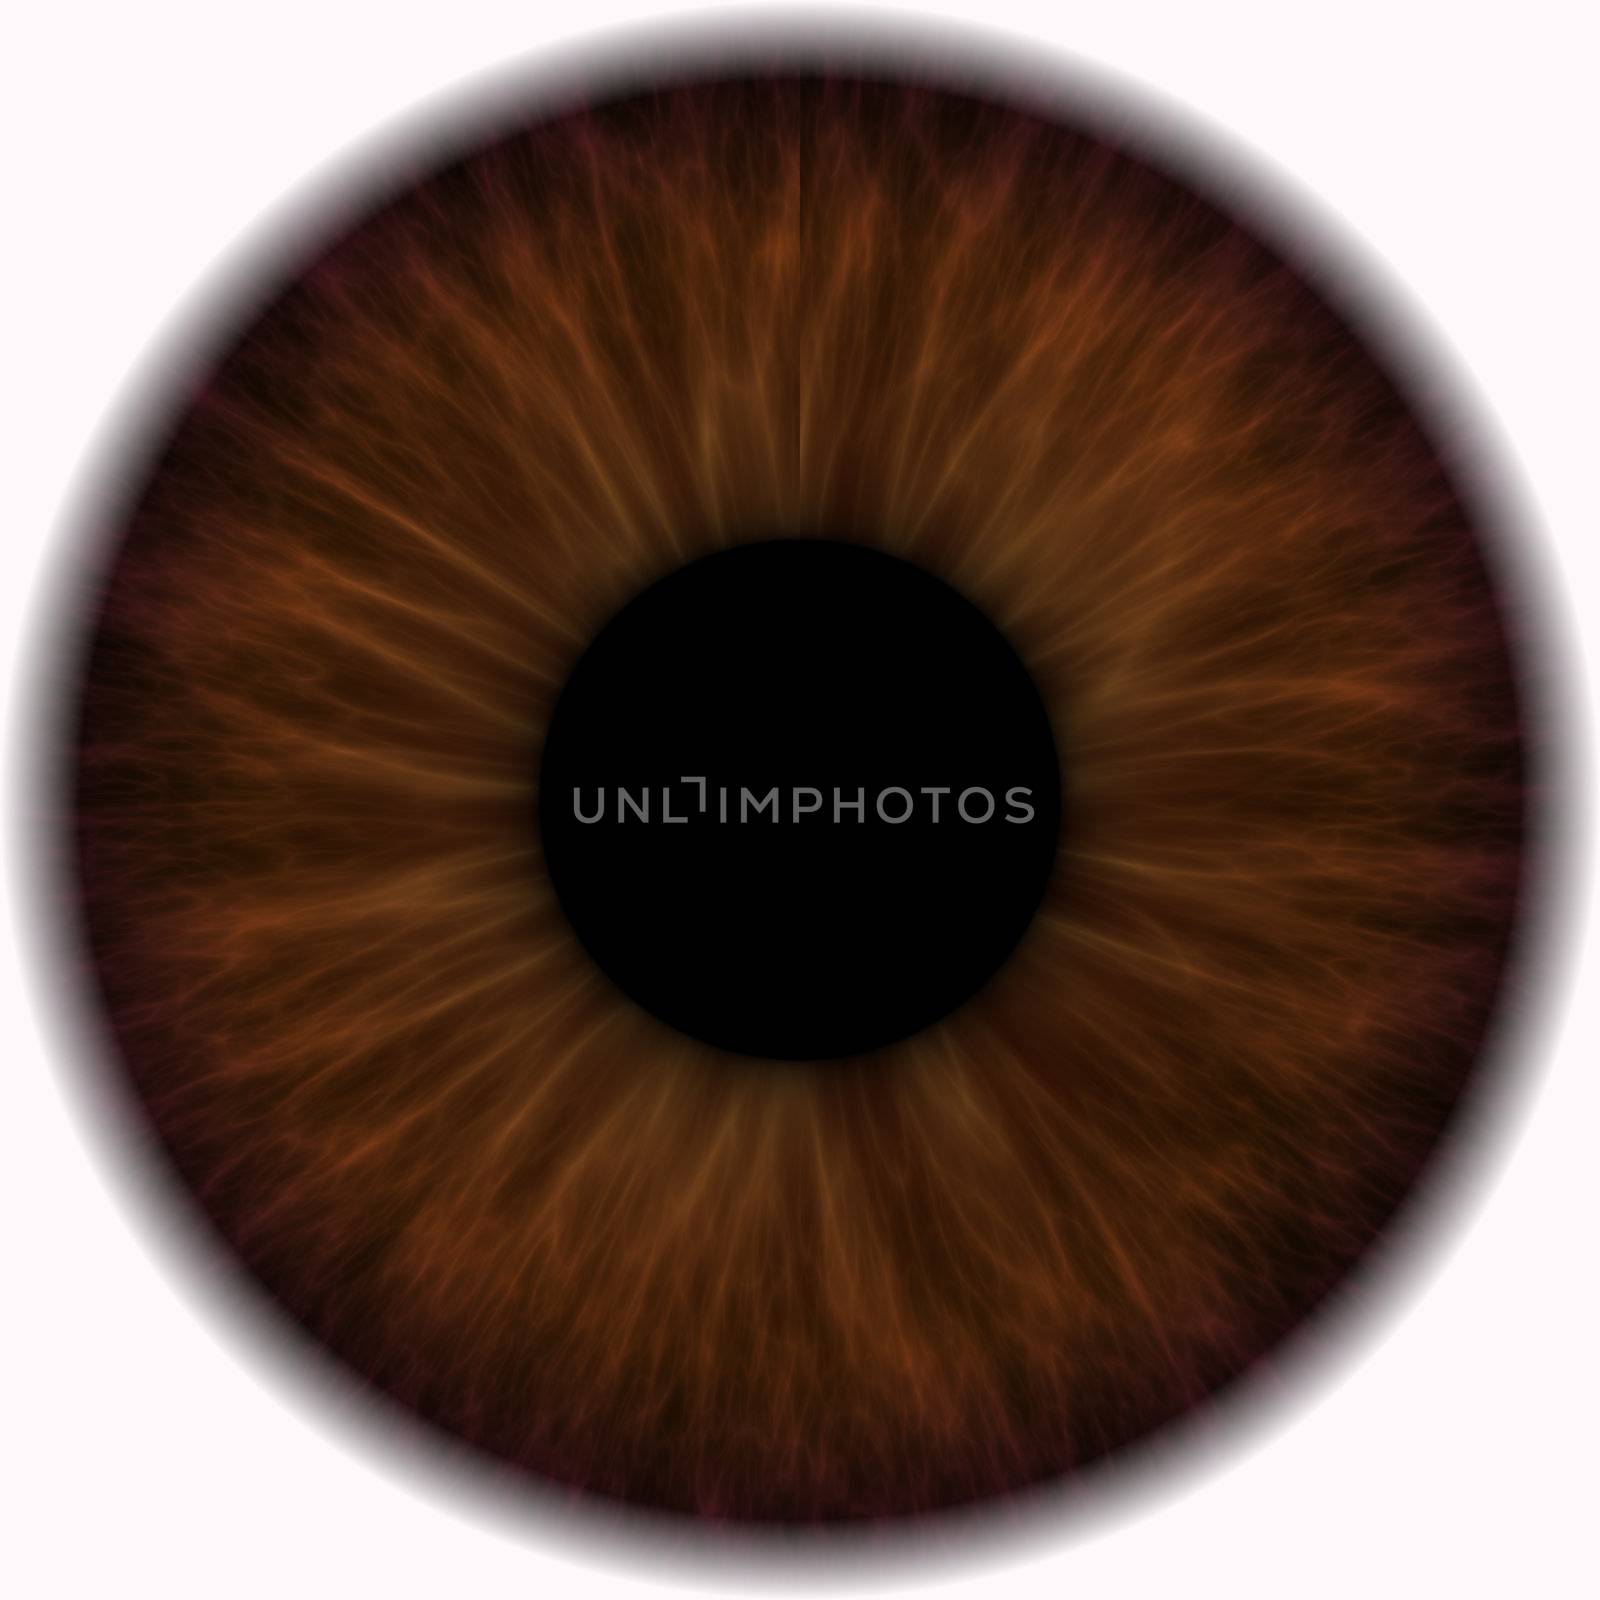 brown eye in a closeup isolated on a white background